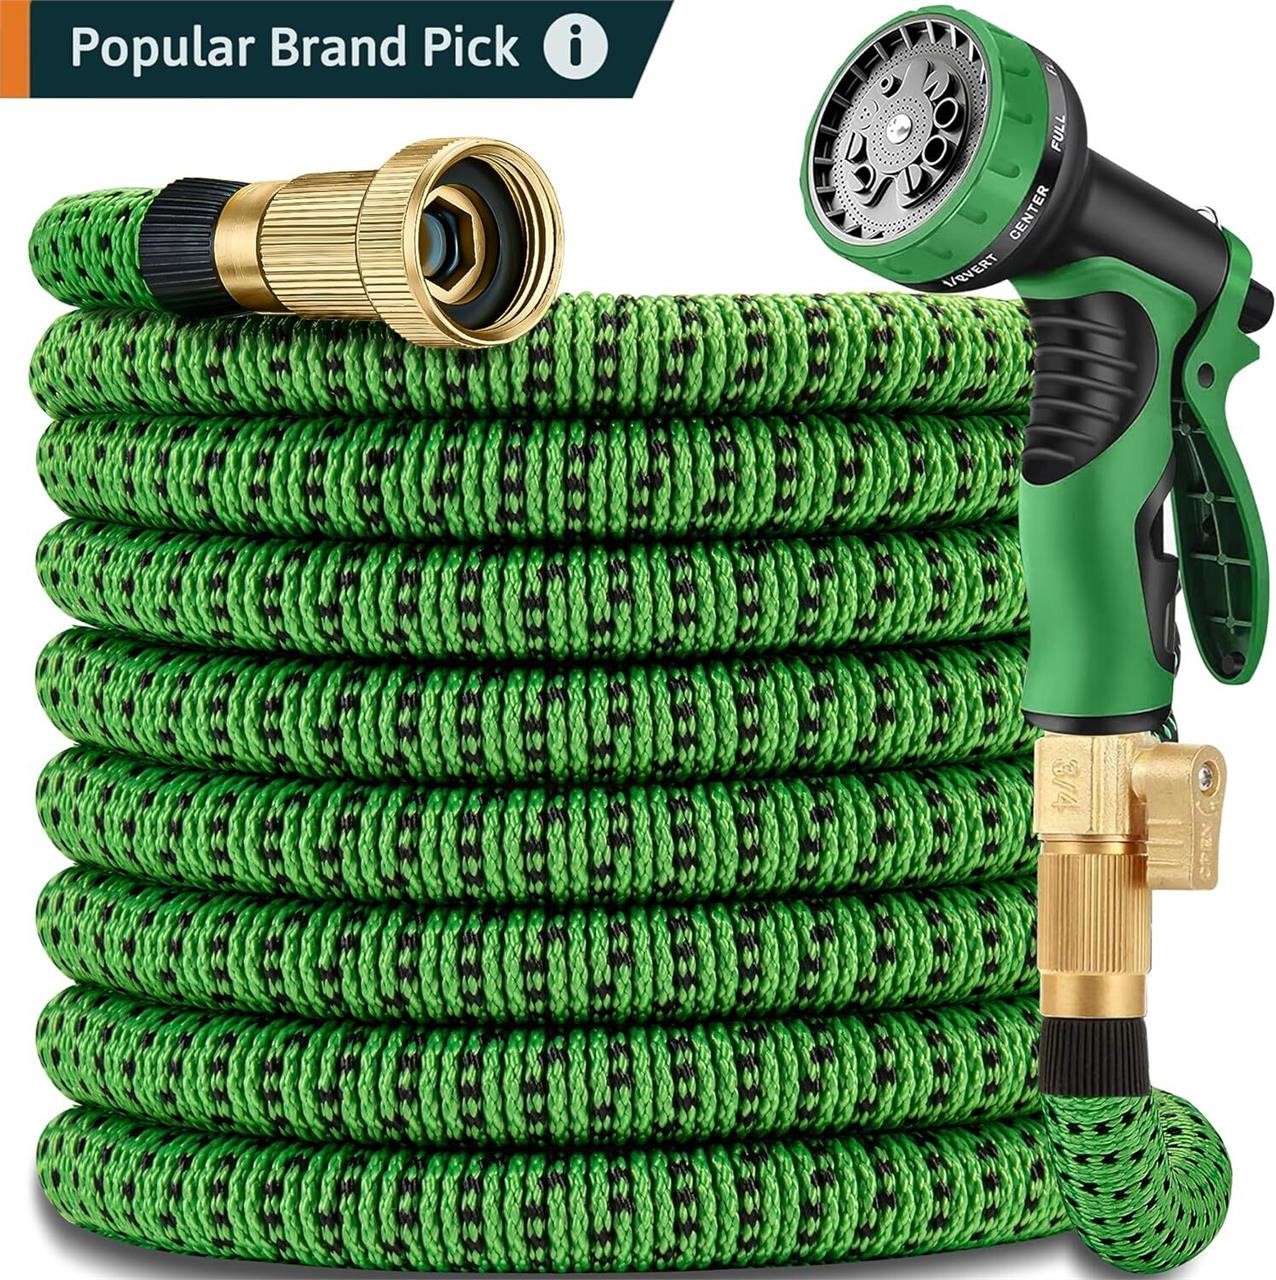 50 ft Expandable Garden Hose with 10 Function Spra